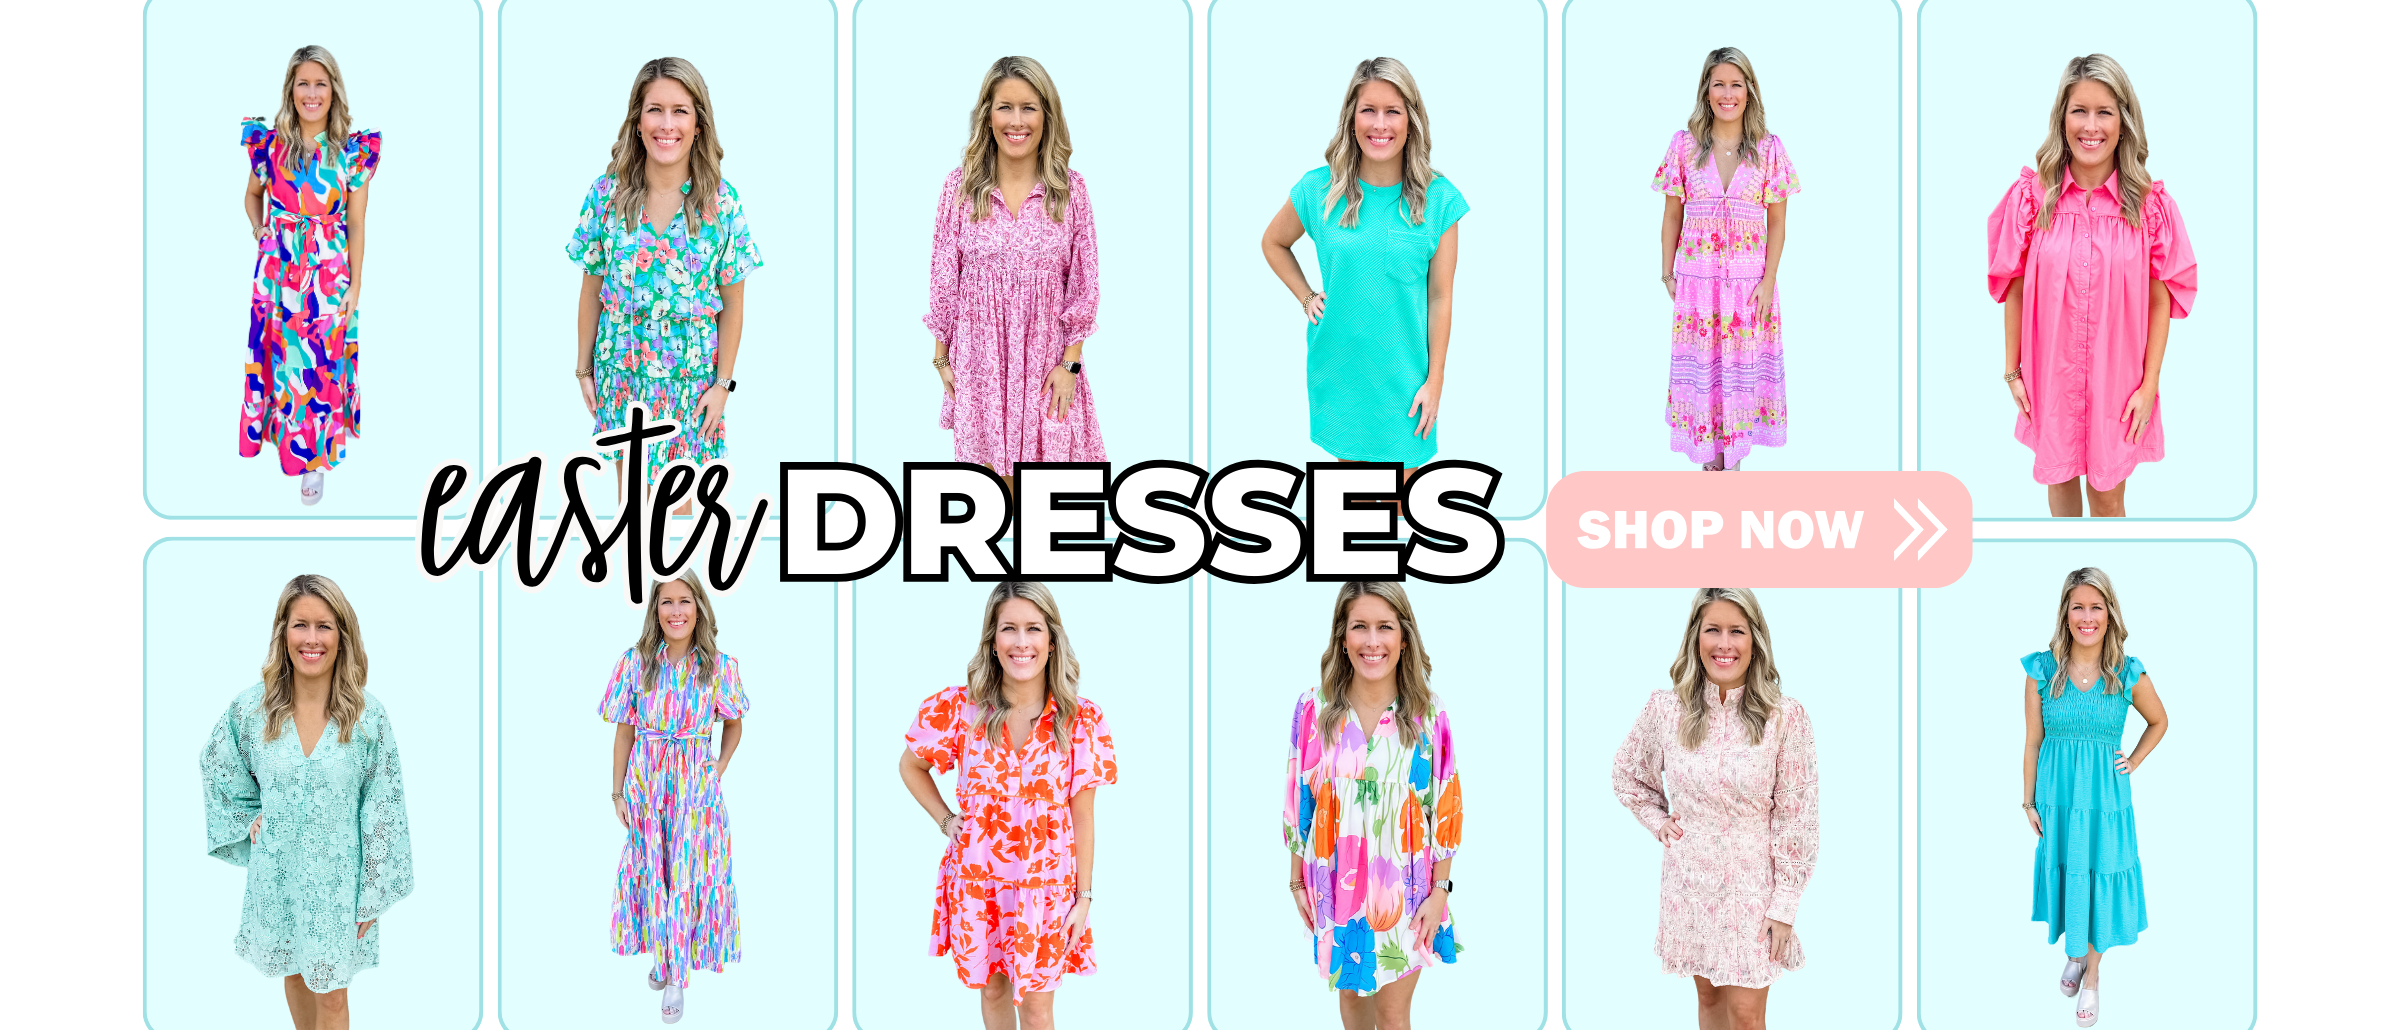 Why Southern Women Buy Easter Dresses